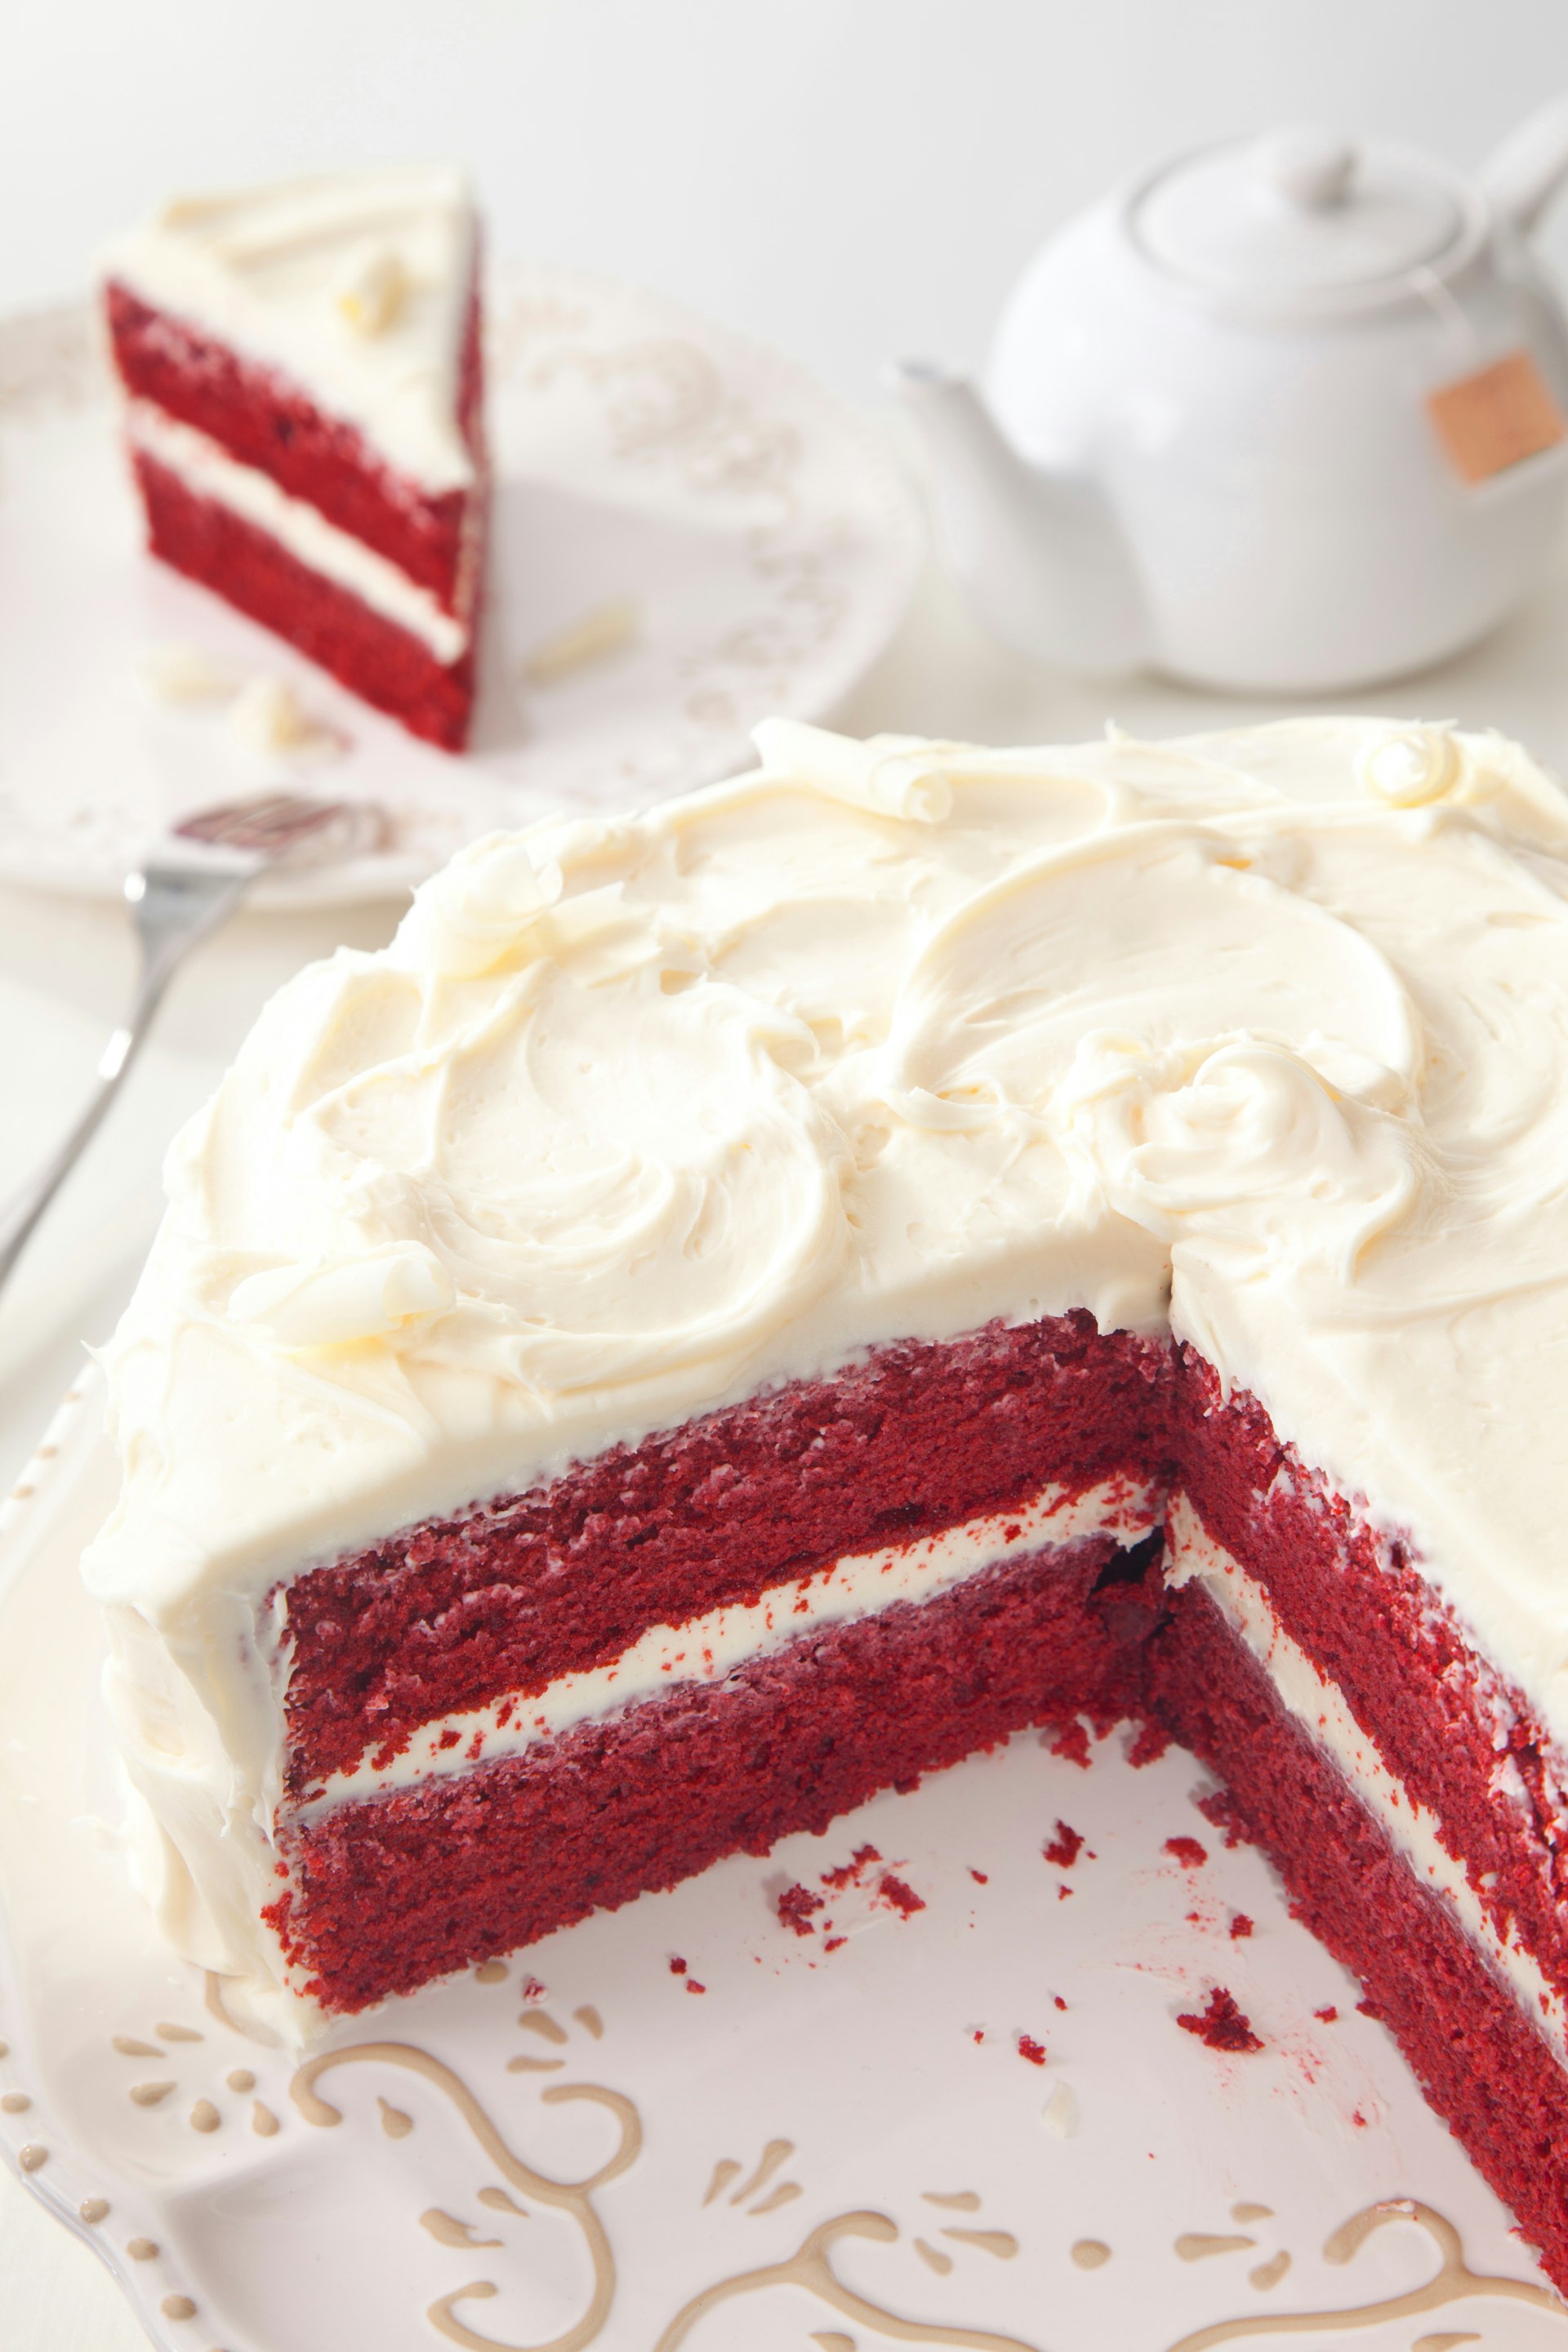 High Angle View Of Red Velvet Cake Slice Served In Plate